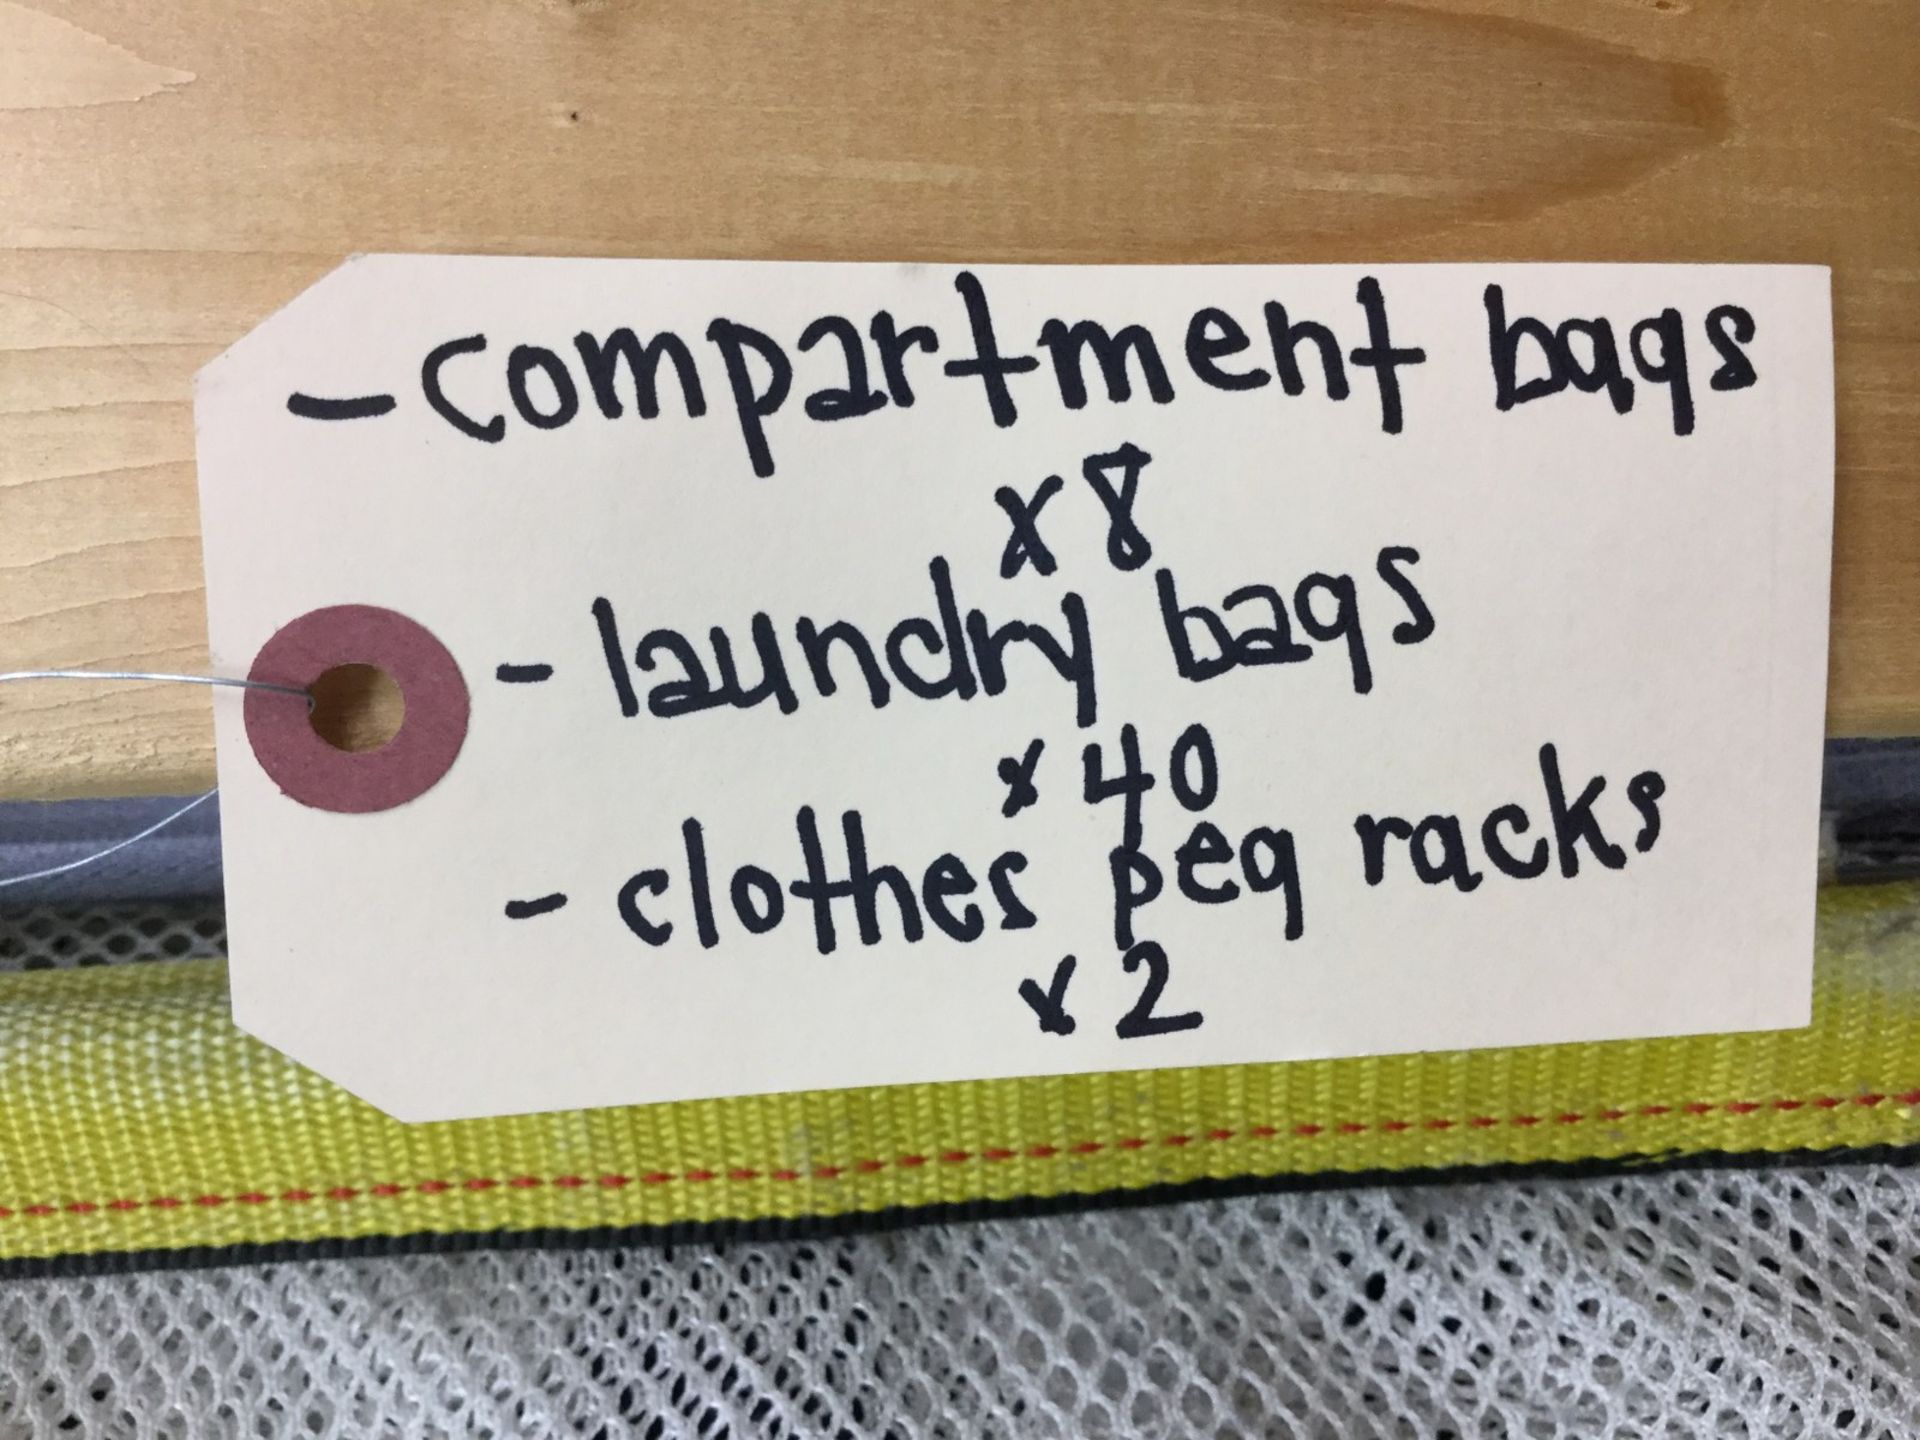 MIXED LOT -- 8 X COMPARTMENT BAGS; 40 X LAUNDRY BAGS; 2 X CLOTHES PEG RACKS - Image 2 of 2